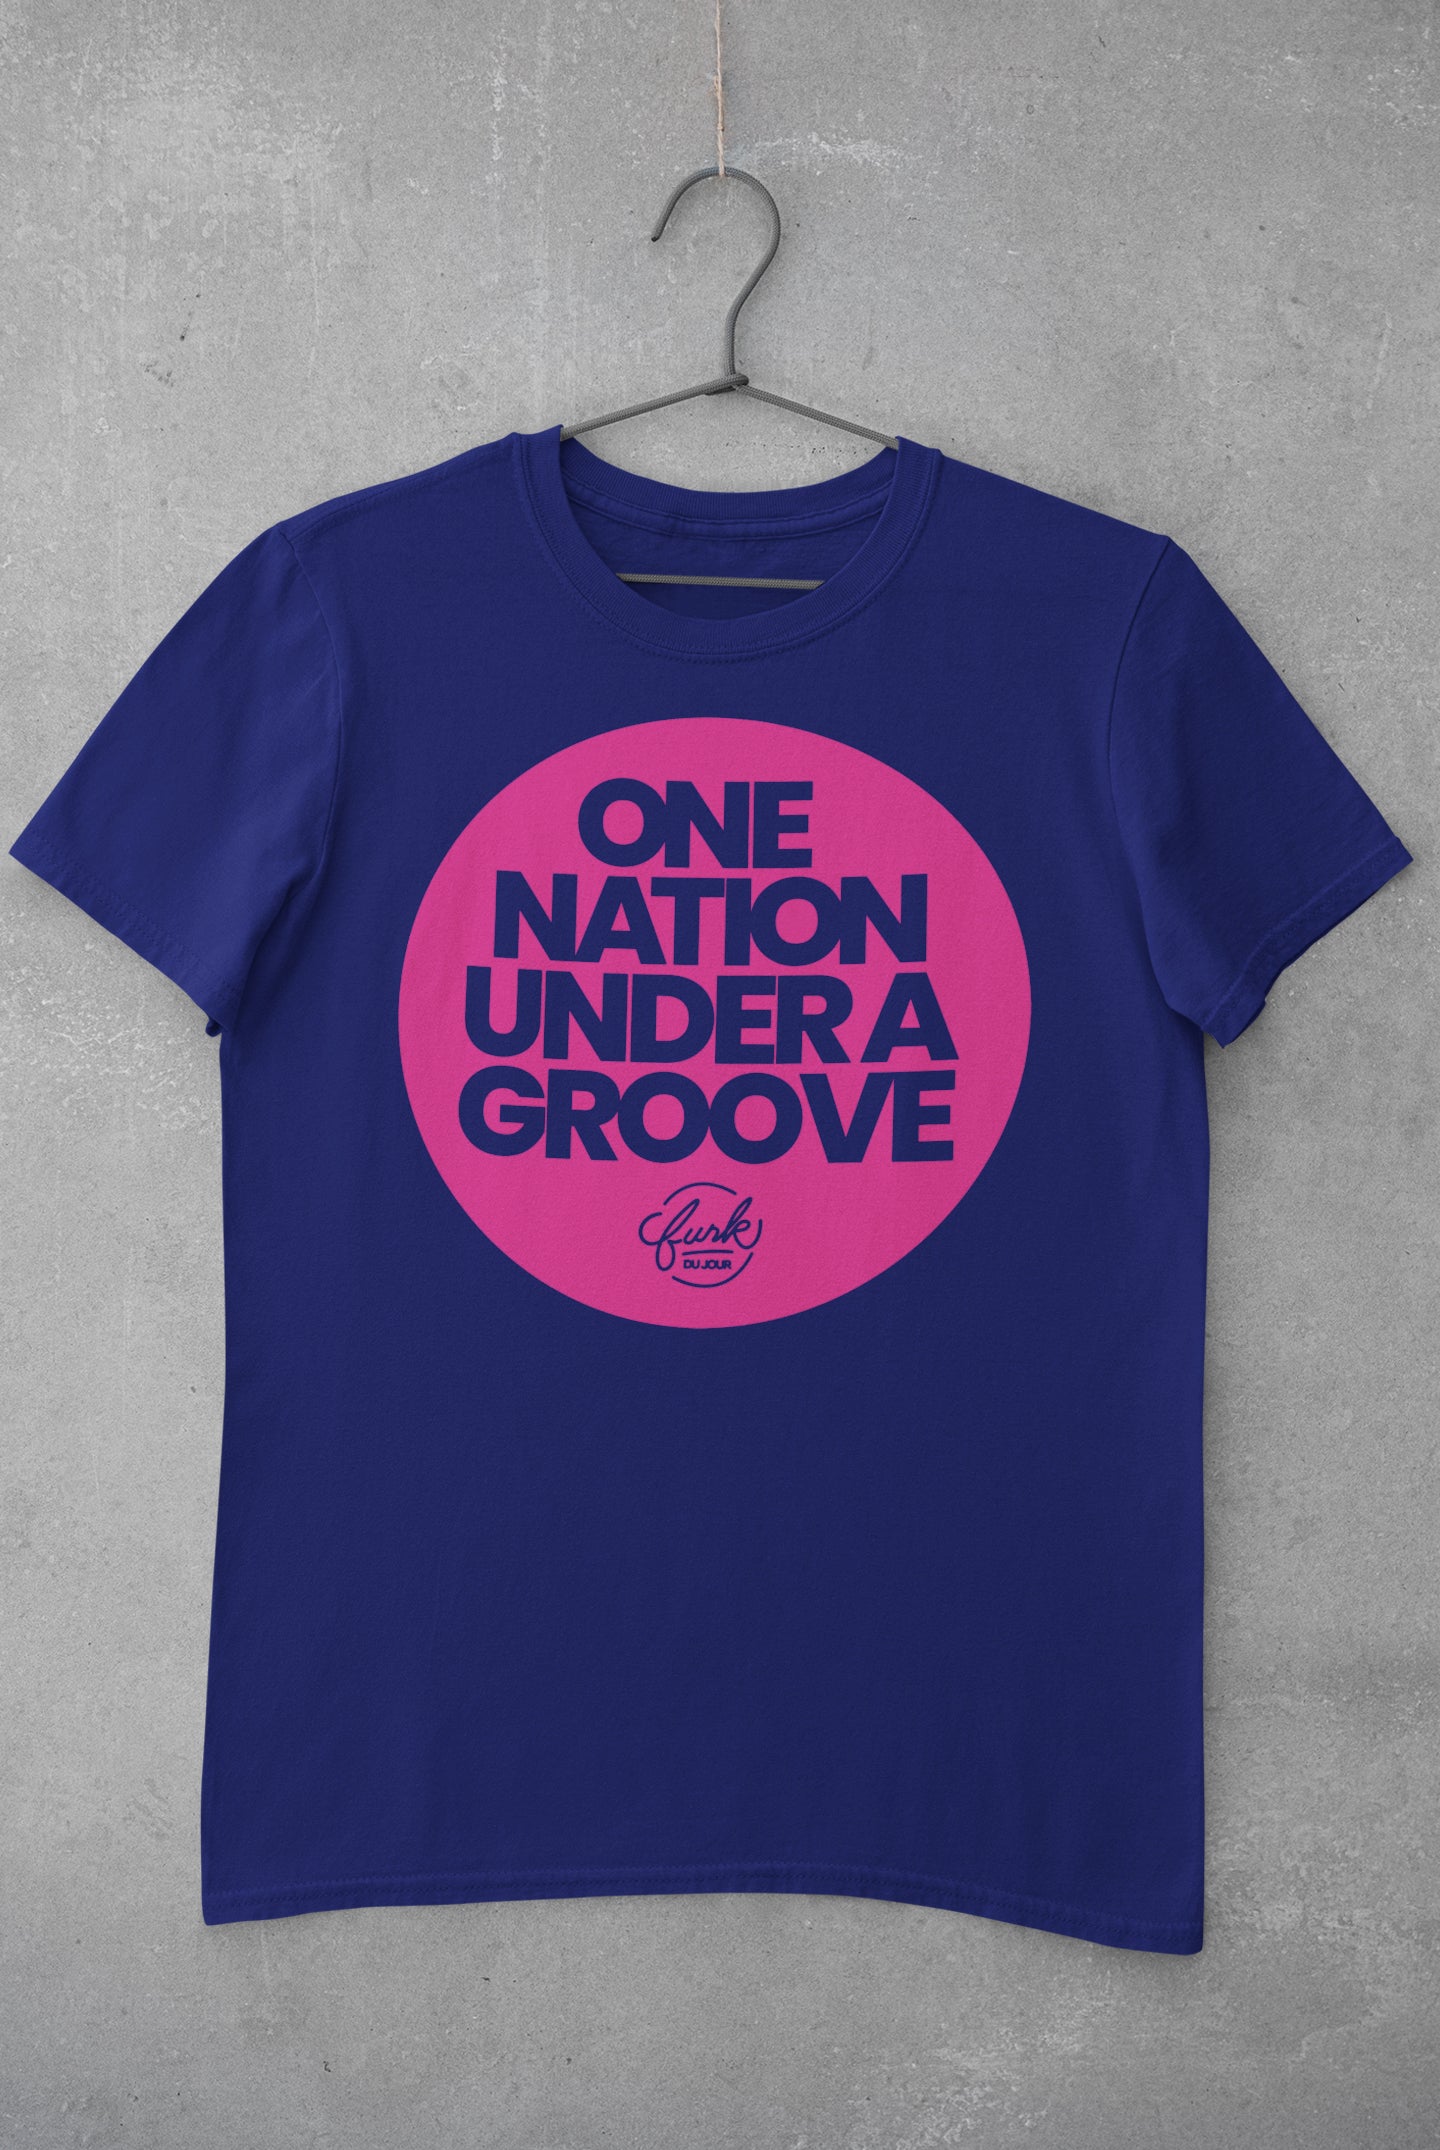 One Nation Under a Groove-funkified pink and blue